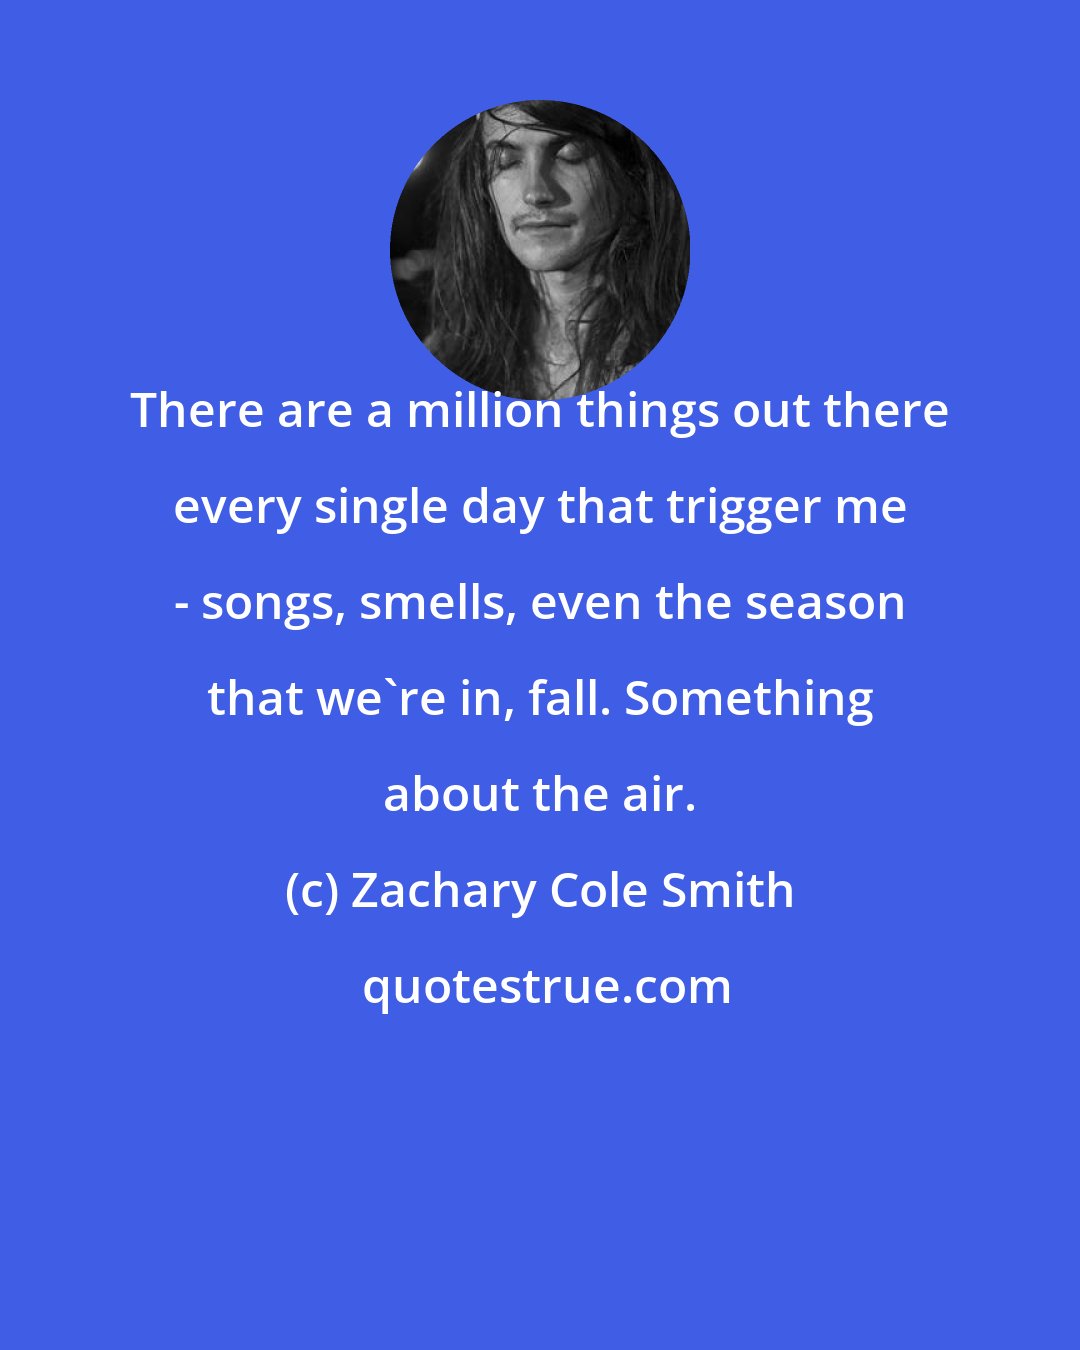 Zachary Cole Smith: There are a million things out there every single day that trigger me - songs, smells, even the season that we're in, fall. Something about the air.